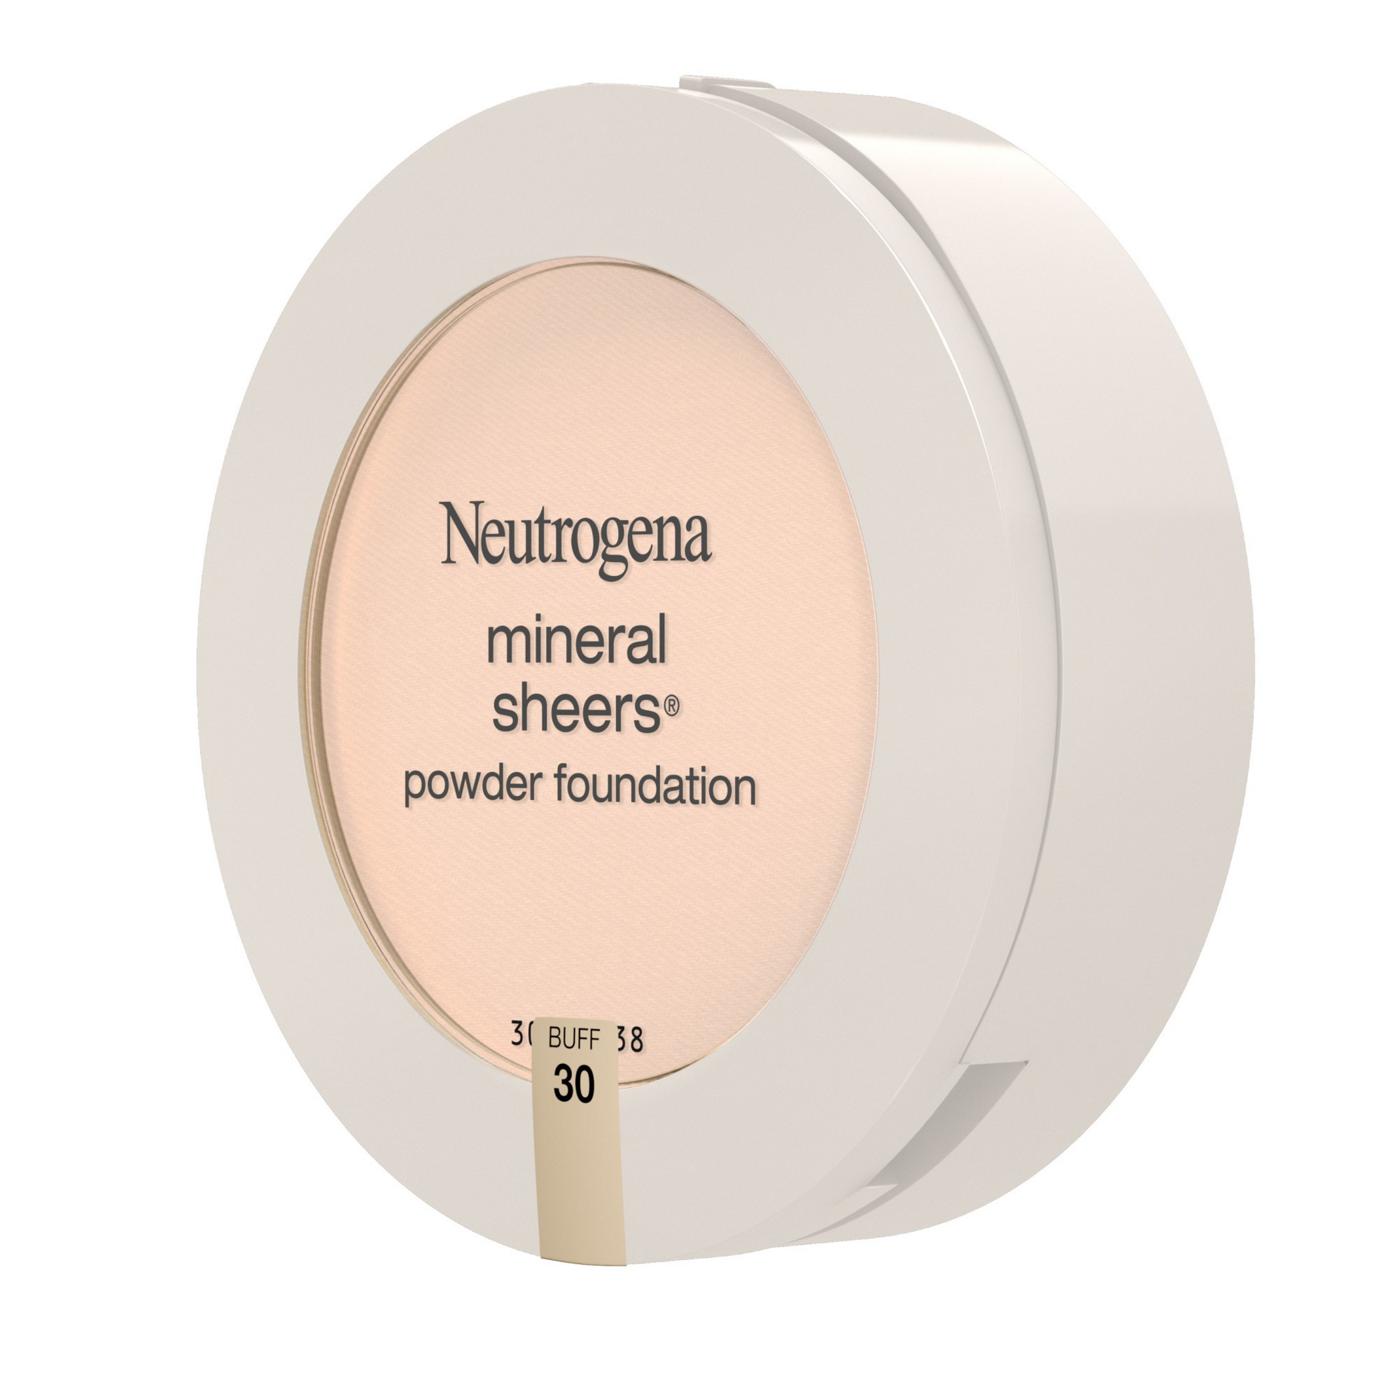 Neutrogena Mineral Sheers Compact Powder Foundation 30 Buff; image 6 of 6